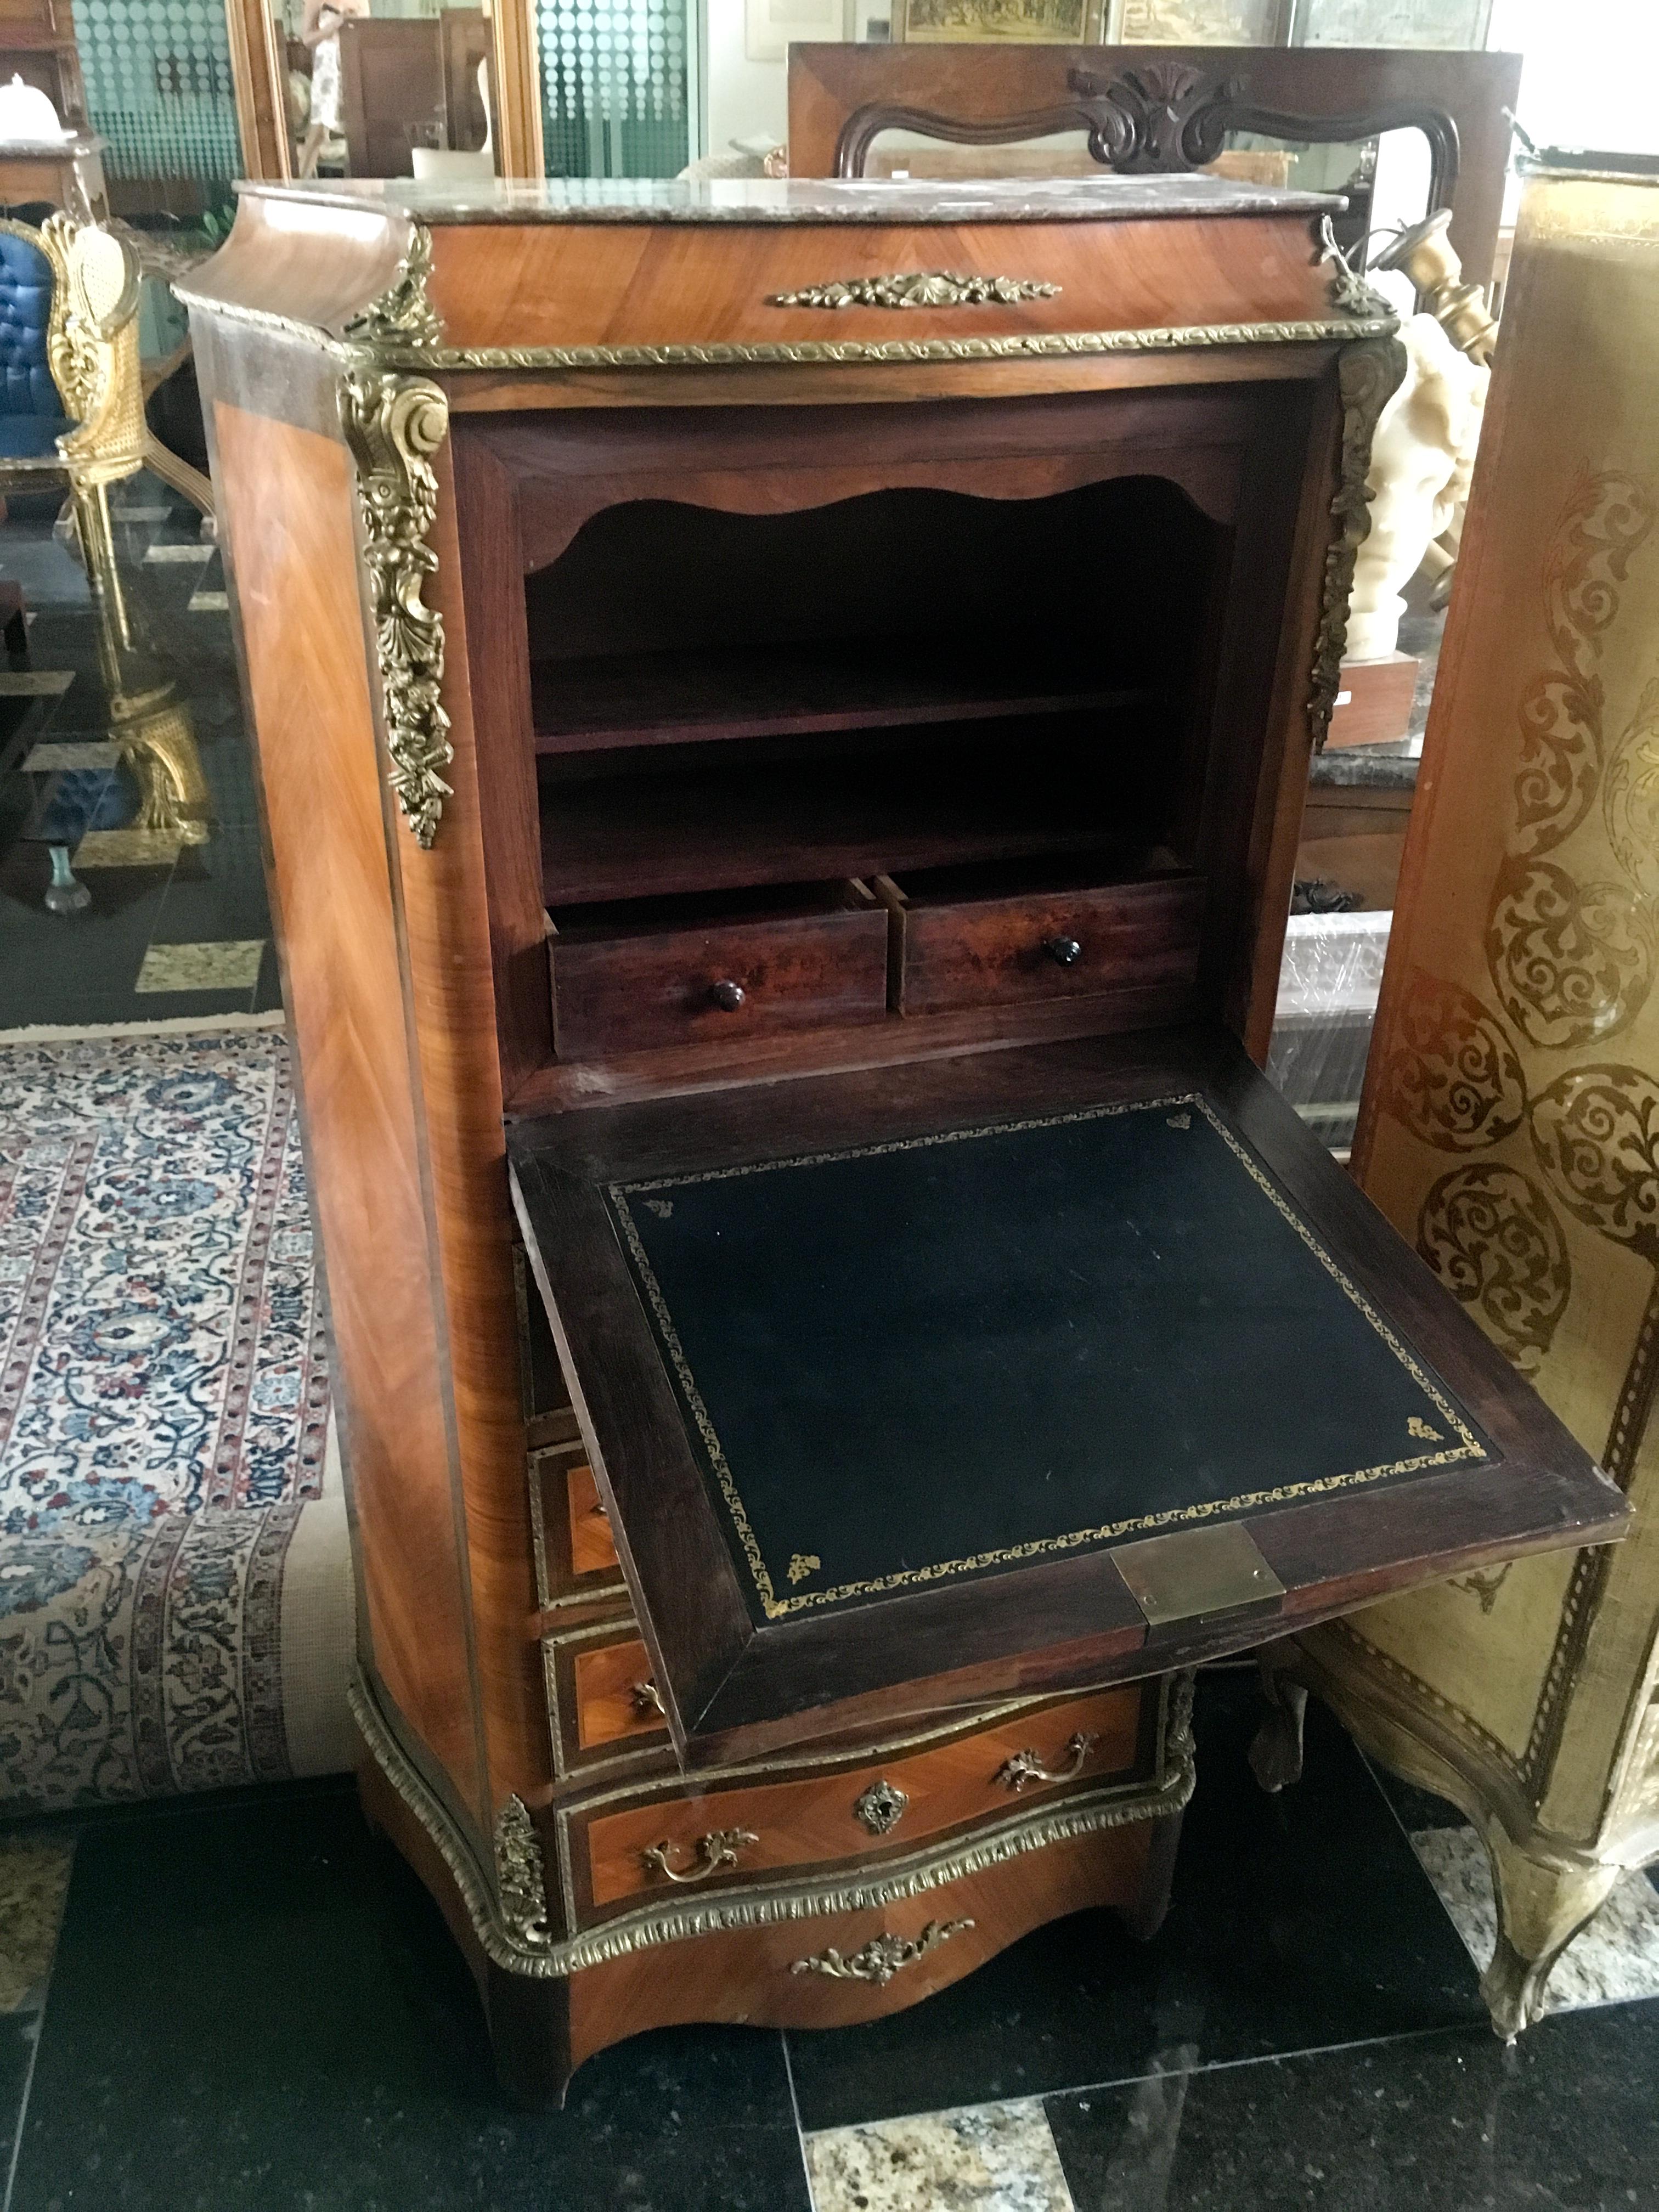 Small secretaire in doucine, curved on three sides, in veneer of precious wood inlaid in leaves in entourages of nets. It opens with four large drawers, a flap revealing two small drawers and shelves. Beautiful bronze trim and thin red marble